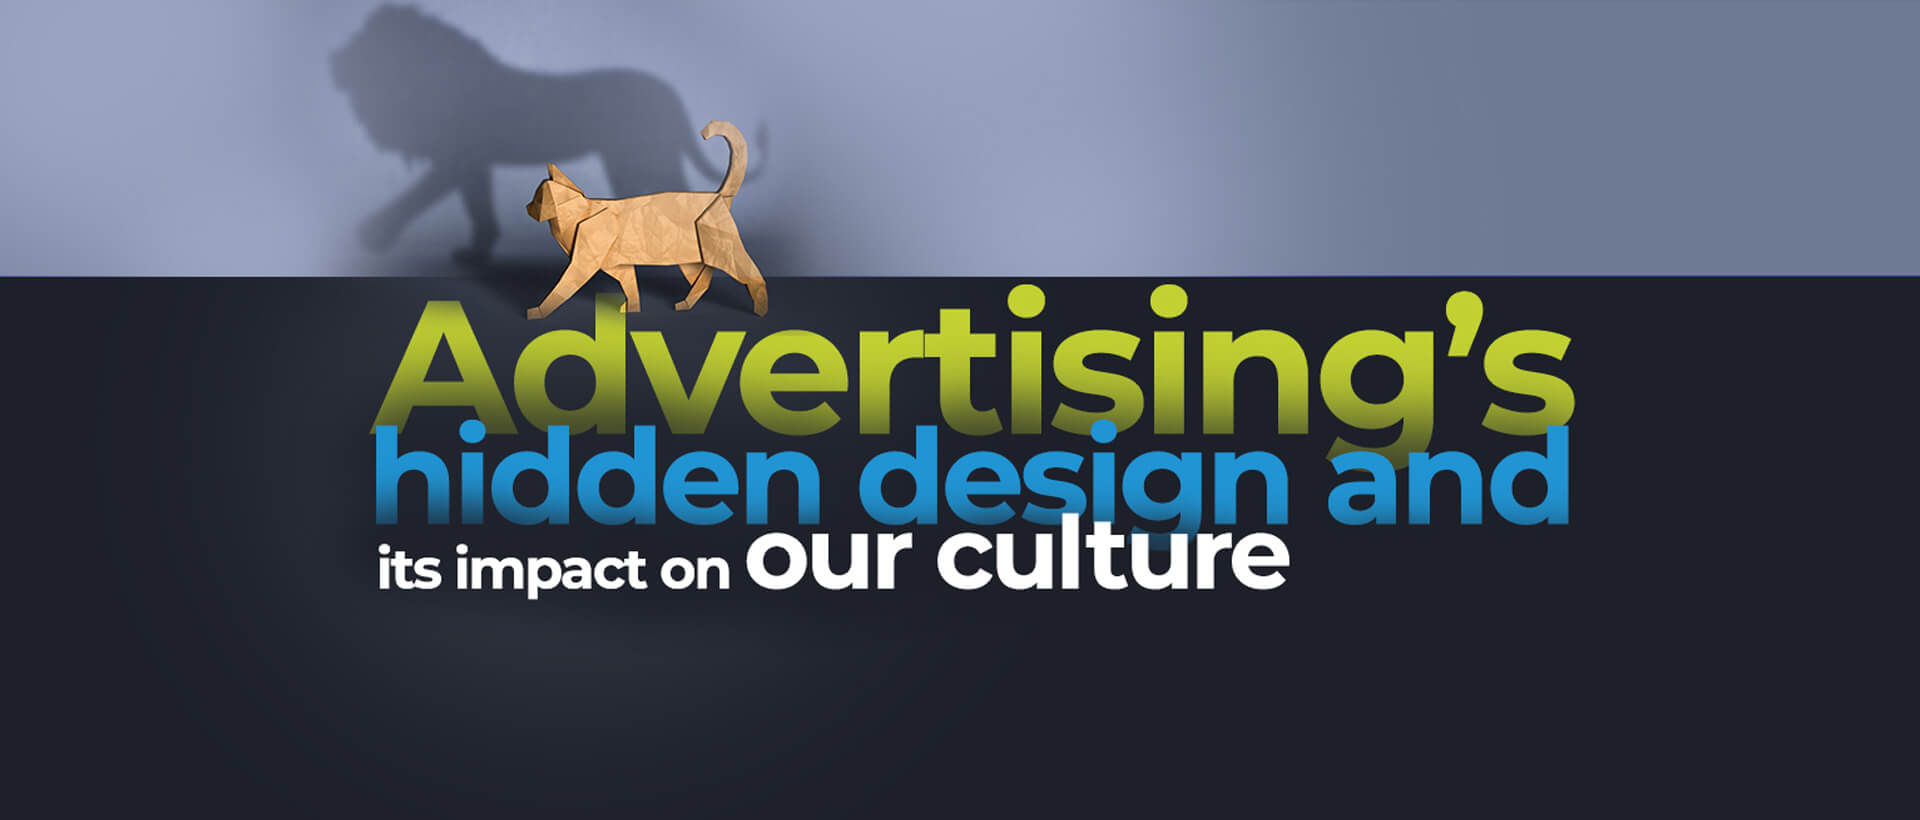 Advertising’s hidden design and its impact on our culture